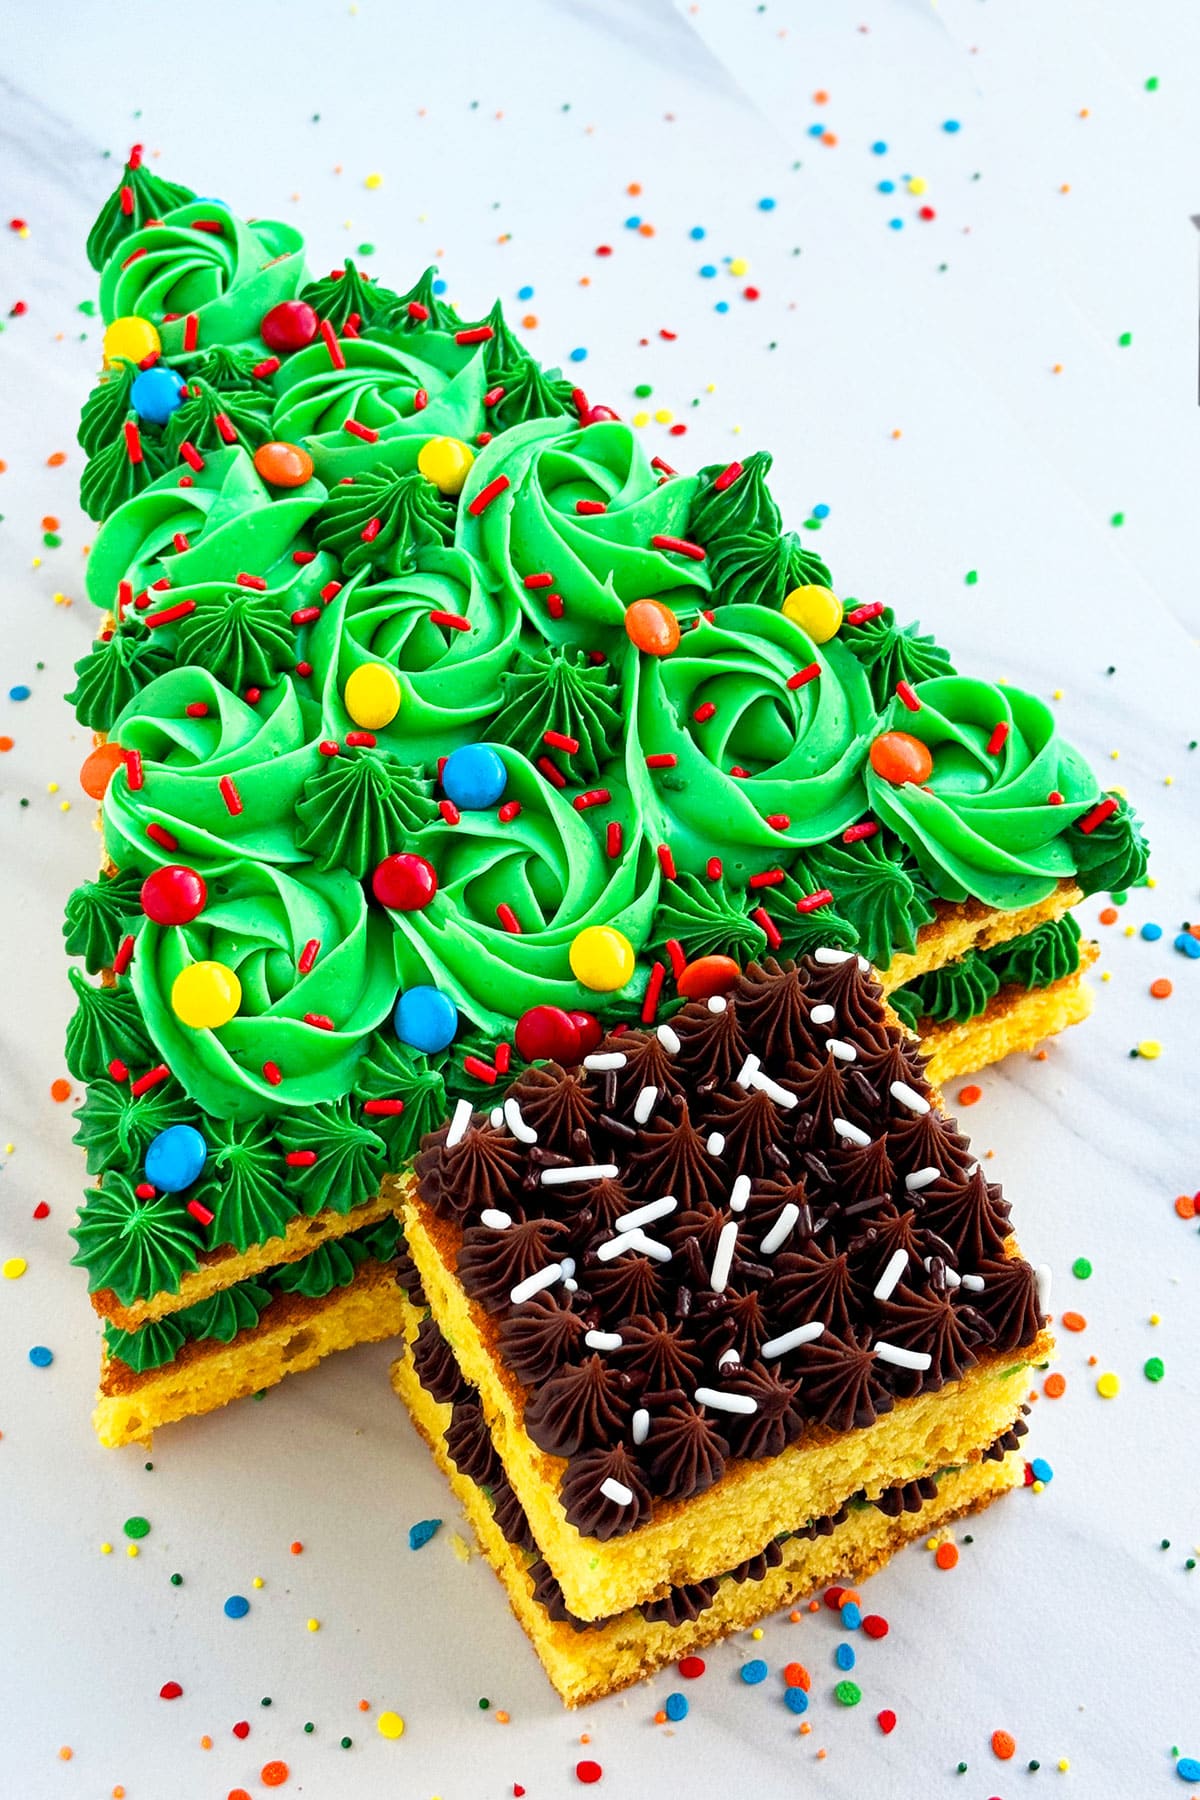 Christmas cake decorating ideas to spruce up your puds | Woman & Home-sonthuy.vn